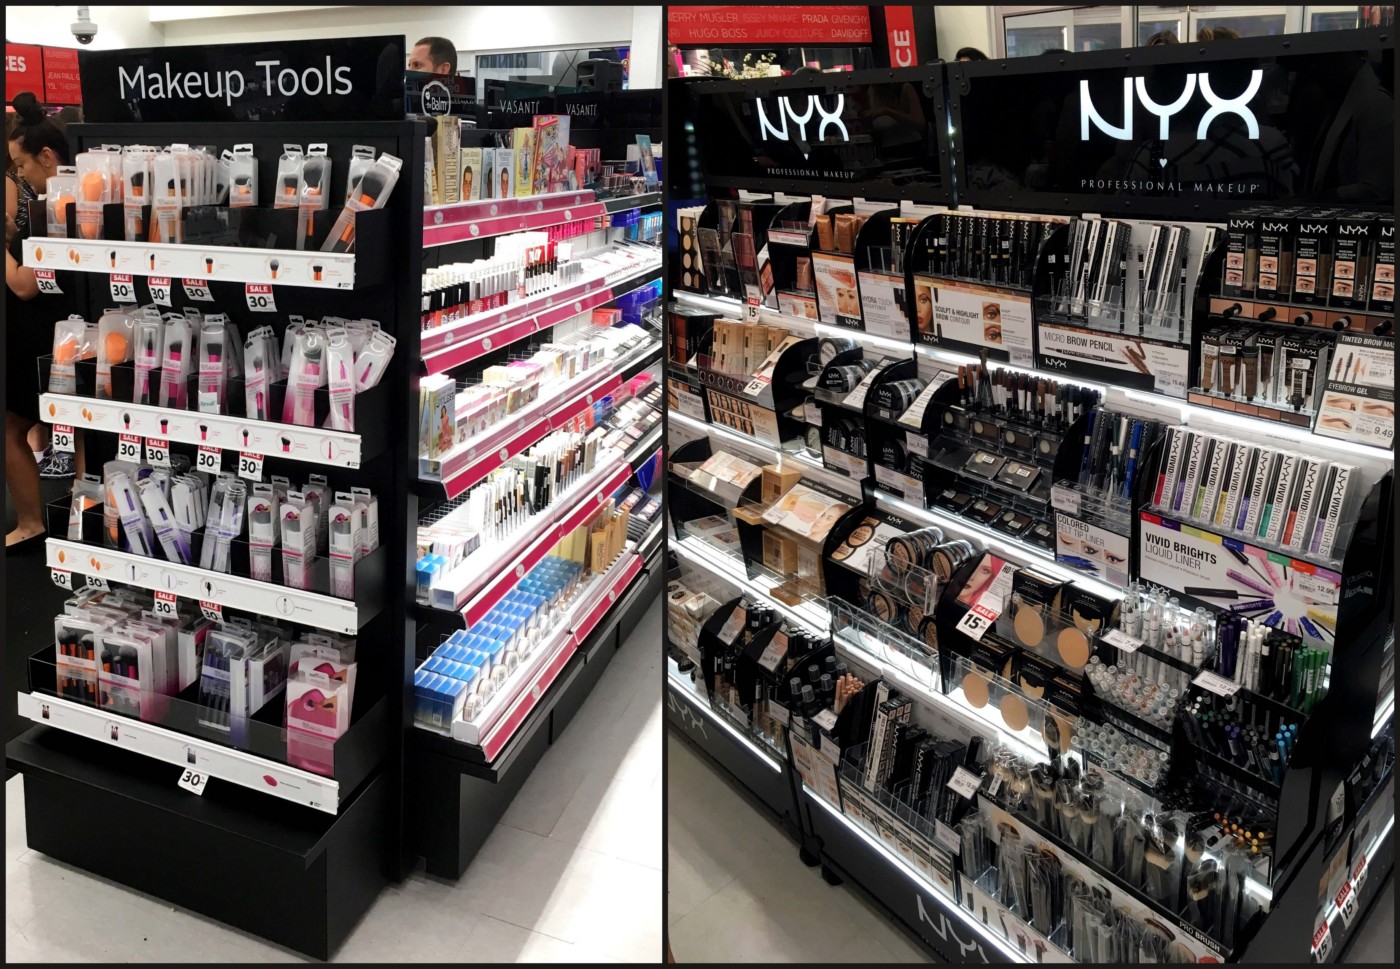 rexall, rexall beauty, rexall inspired beauty, drugstore makeup, best drugstore makeup, where to buy makeup canada, best places to buy makeup, nyx canada, thebalm canada, milani canada, best deals on makeup in canada, kit makeup, kit makeup brushes, rexall brand, canadian beauty, canadian makeup